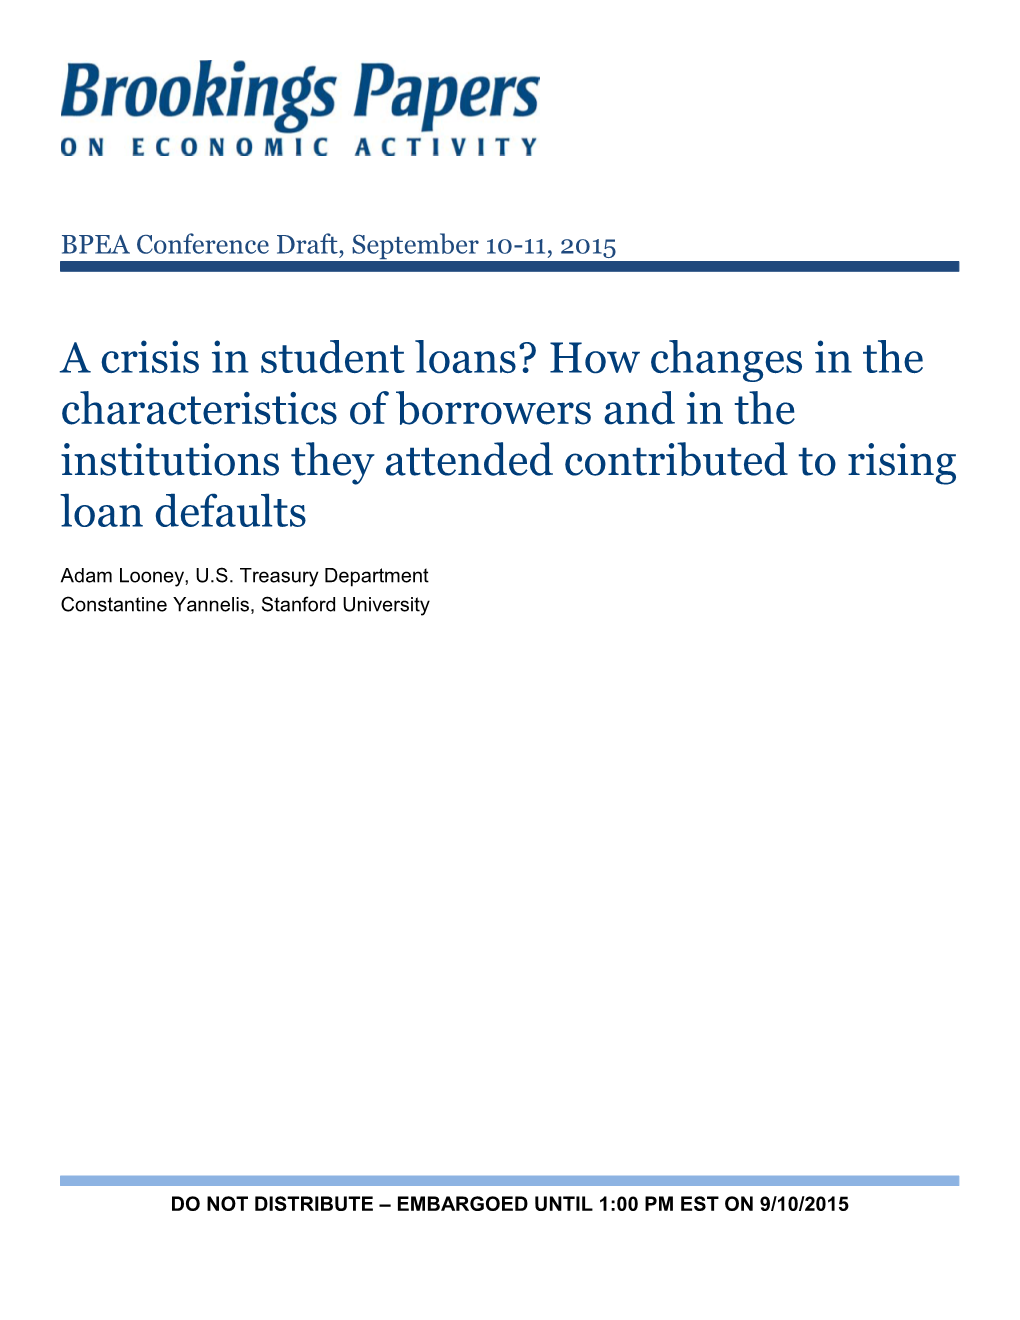 A Crisis in Student Loans? How Changes in the Characteristics of Borrowers and in the Institutions They Attended Contributed to Rising Loan Defaults